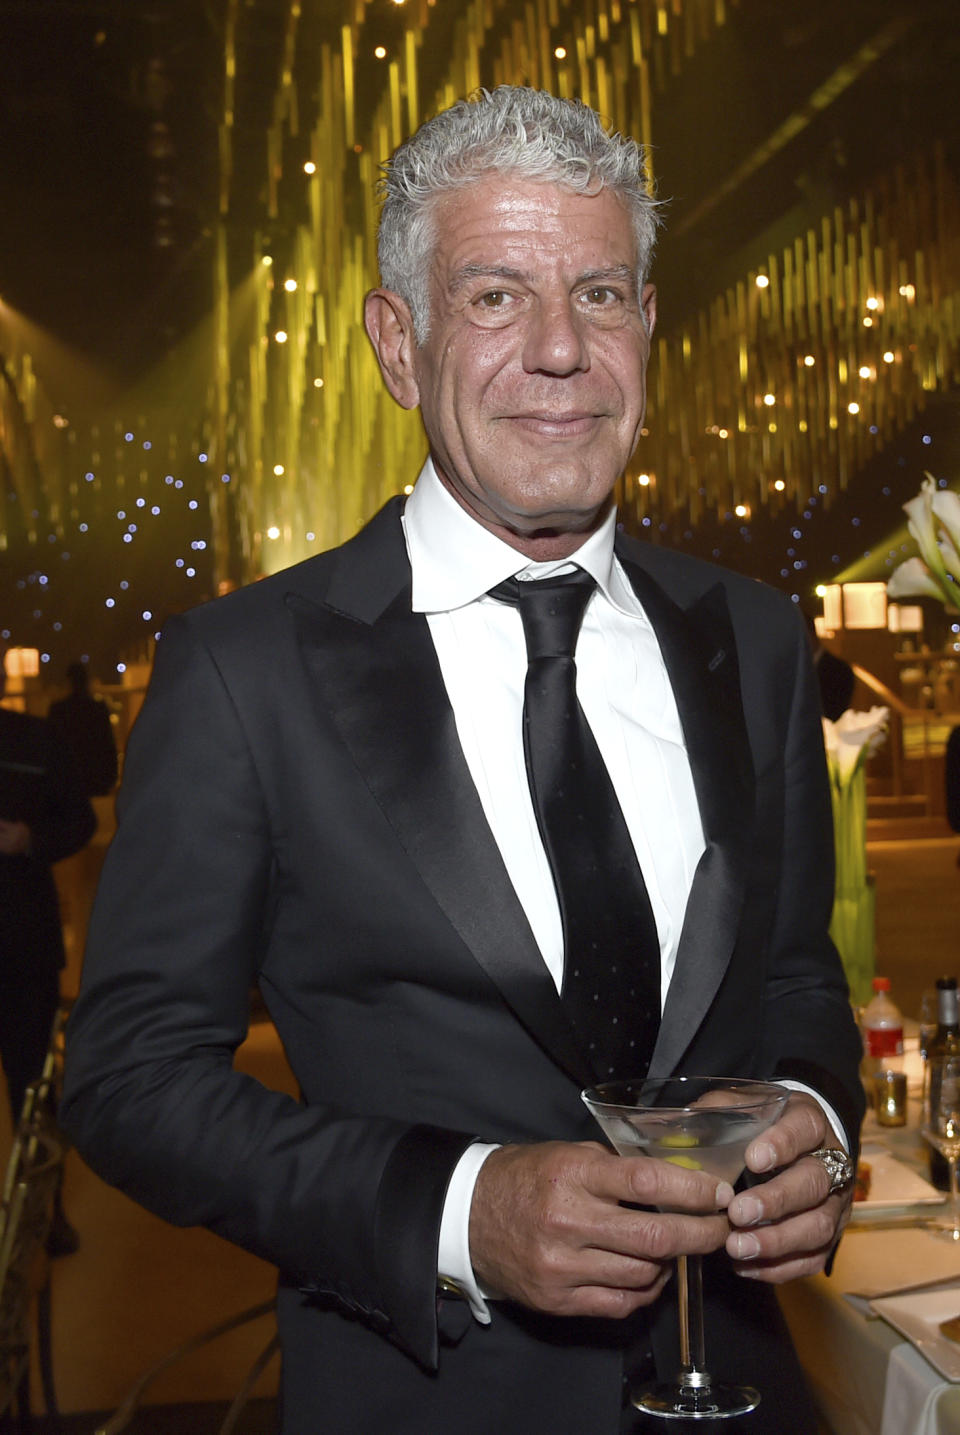 FILE - In this Saturday, Sept. 9, 2017, file photo, Anthony Bourdain attends the Governors Ball during night one of the Creative Arts Emmy Awards at the Microsoft Theater in Los Angeles. The revelation that a documentary filmmaker used voice-cloning software to make the late chef Bourdain say words he never spoke has drawn criticism amid ethical concerns about use of the powerful technology. The movie “Roadrunner: A Film About Anthony Bourdain” appeared in cinemas Friday, July 16, 2021, and mostly features real footage of the beloved celebrity chef and globe-trotting television host before he died in 2018. (Photo by Richard Shotwell/Invision/AP, File)